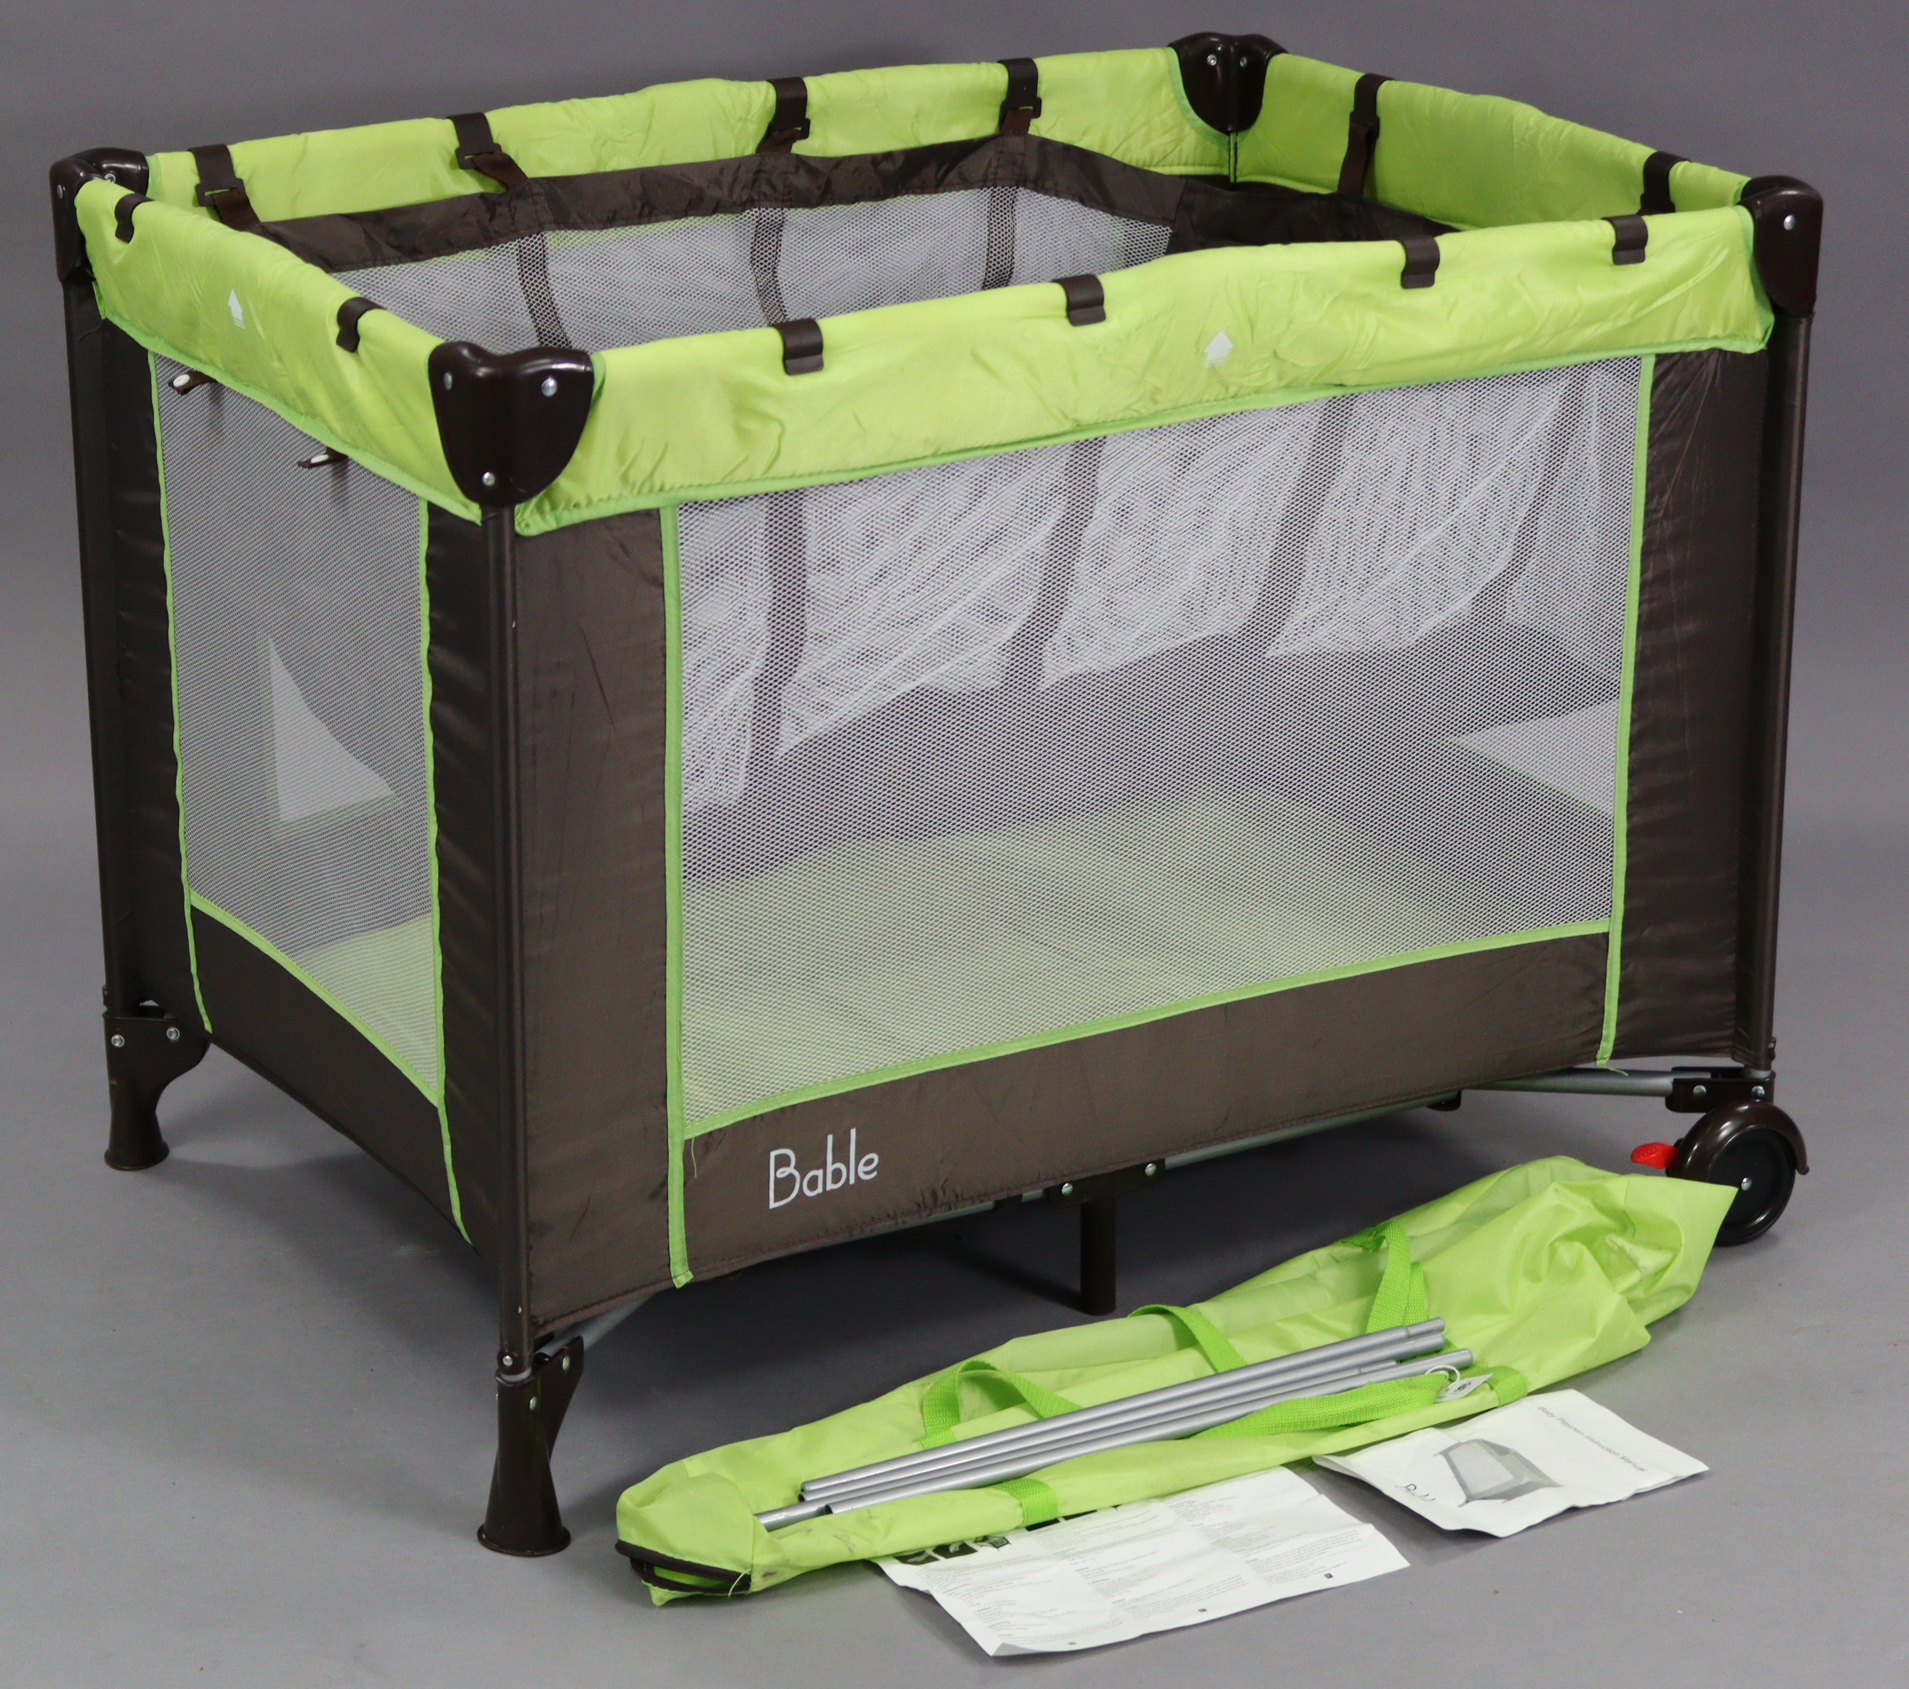 A Bable travel cot/playpen, with case.